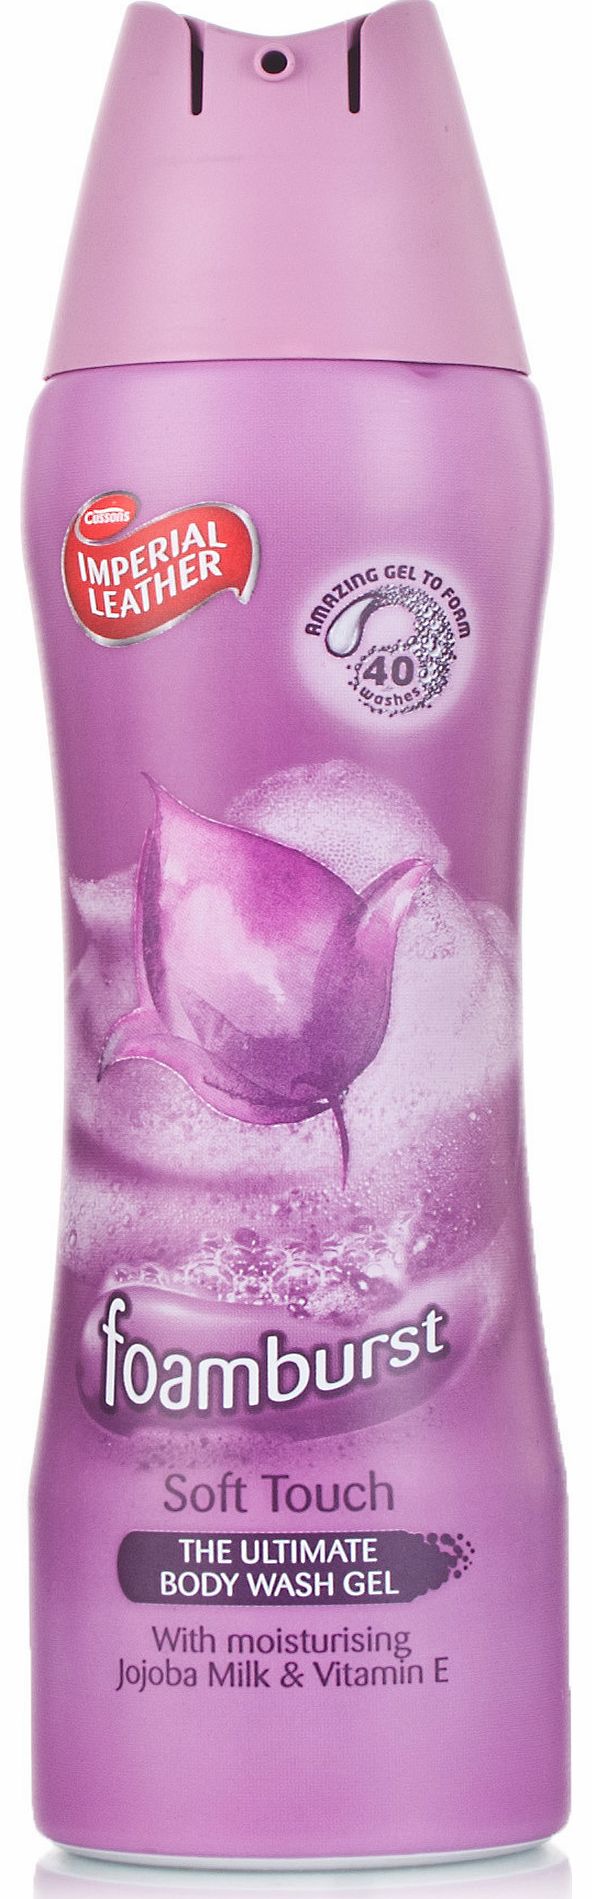 Imperial Leather Foamburst Soft Touch Shower Gel